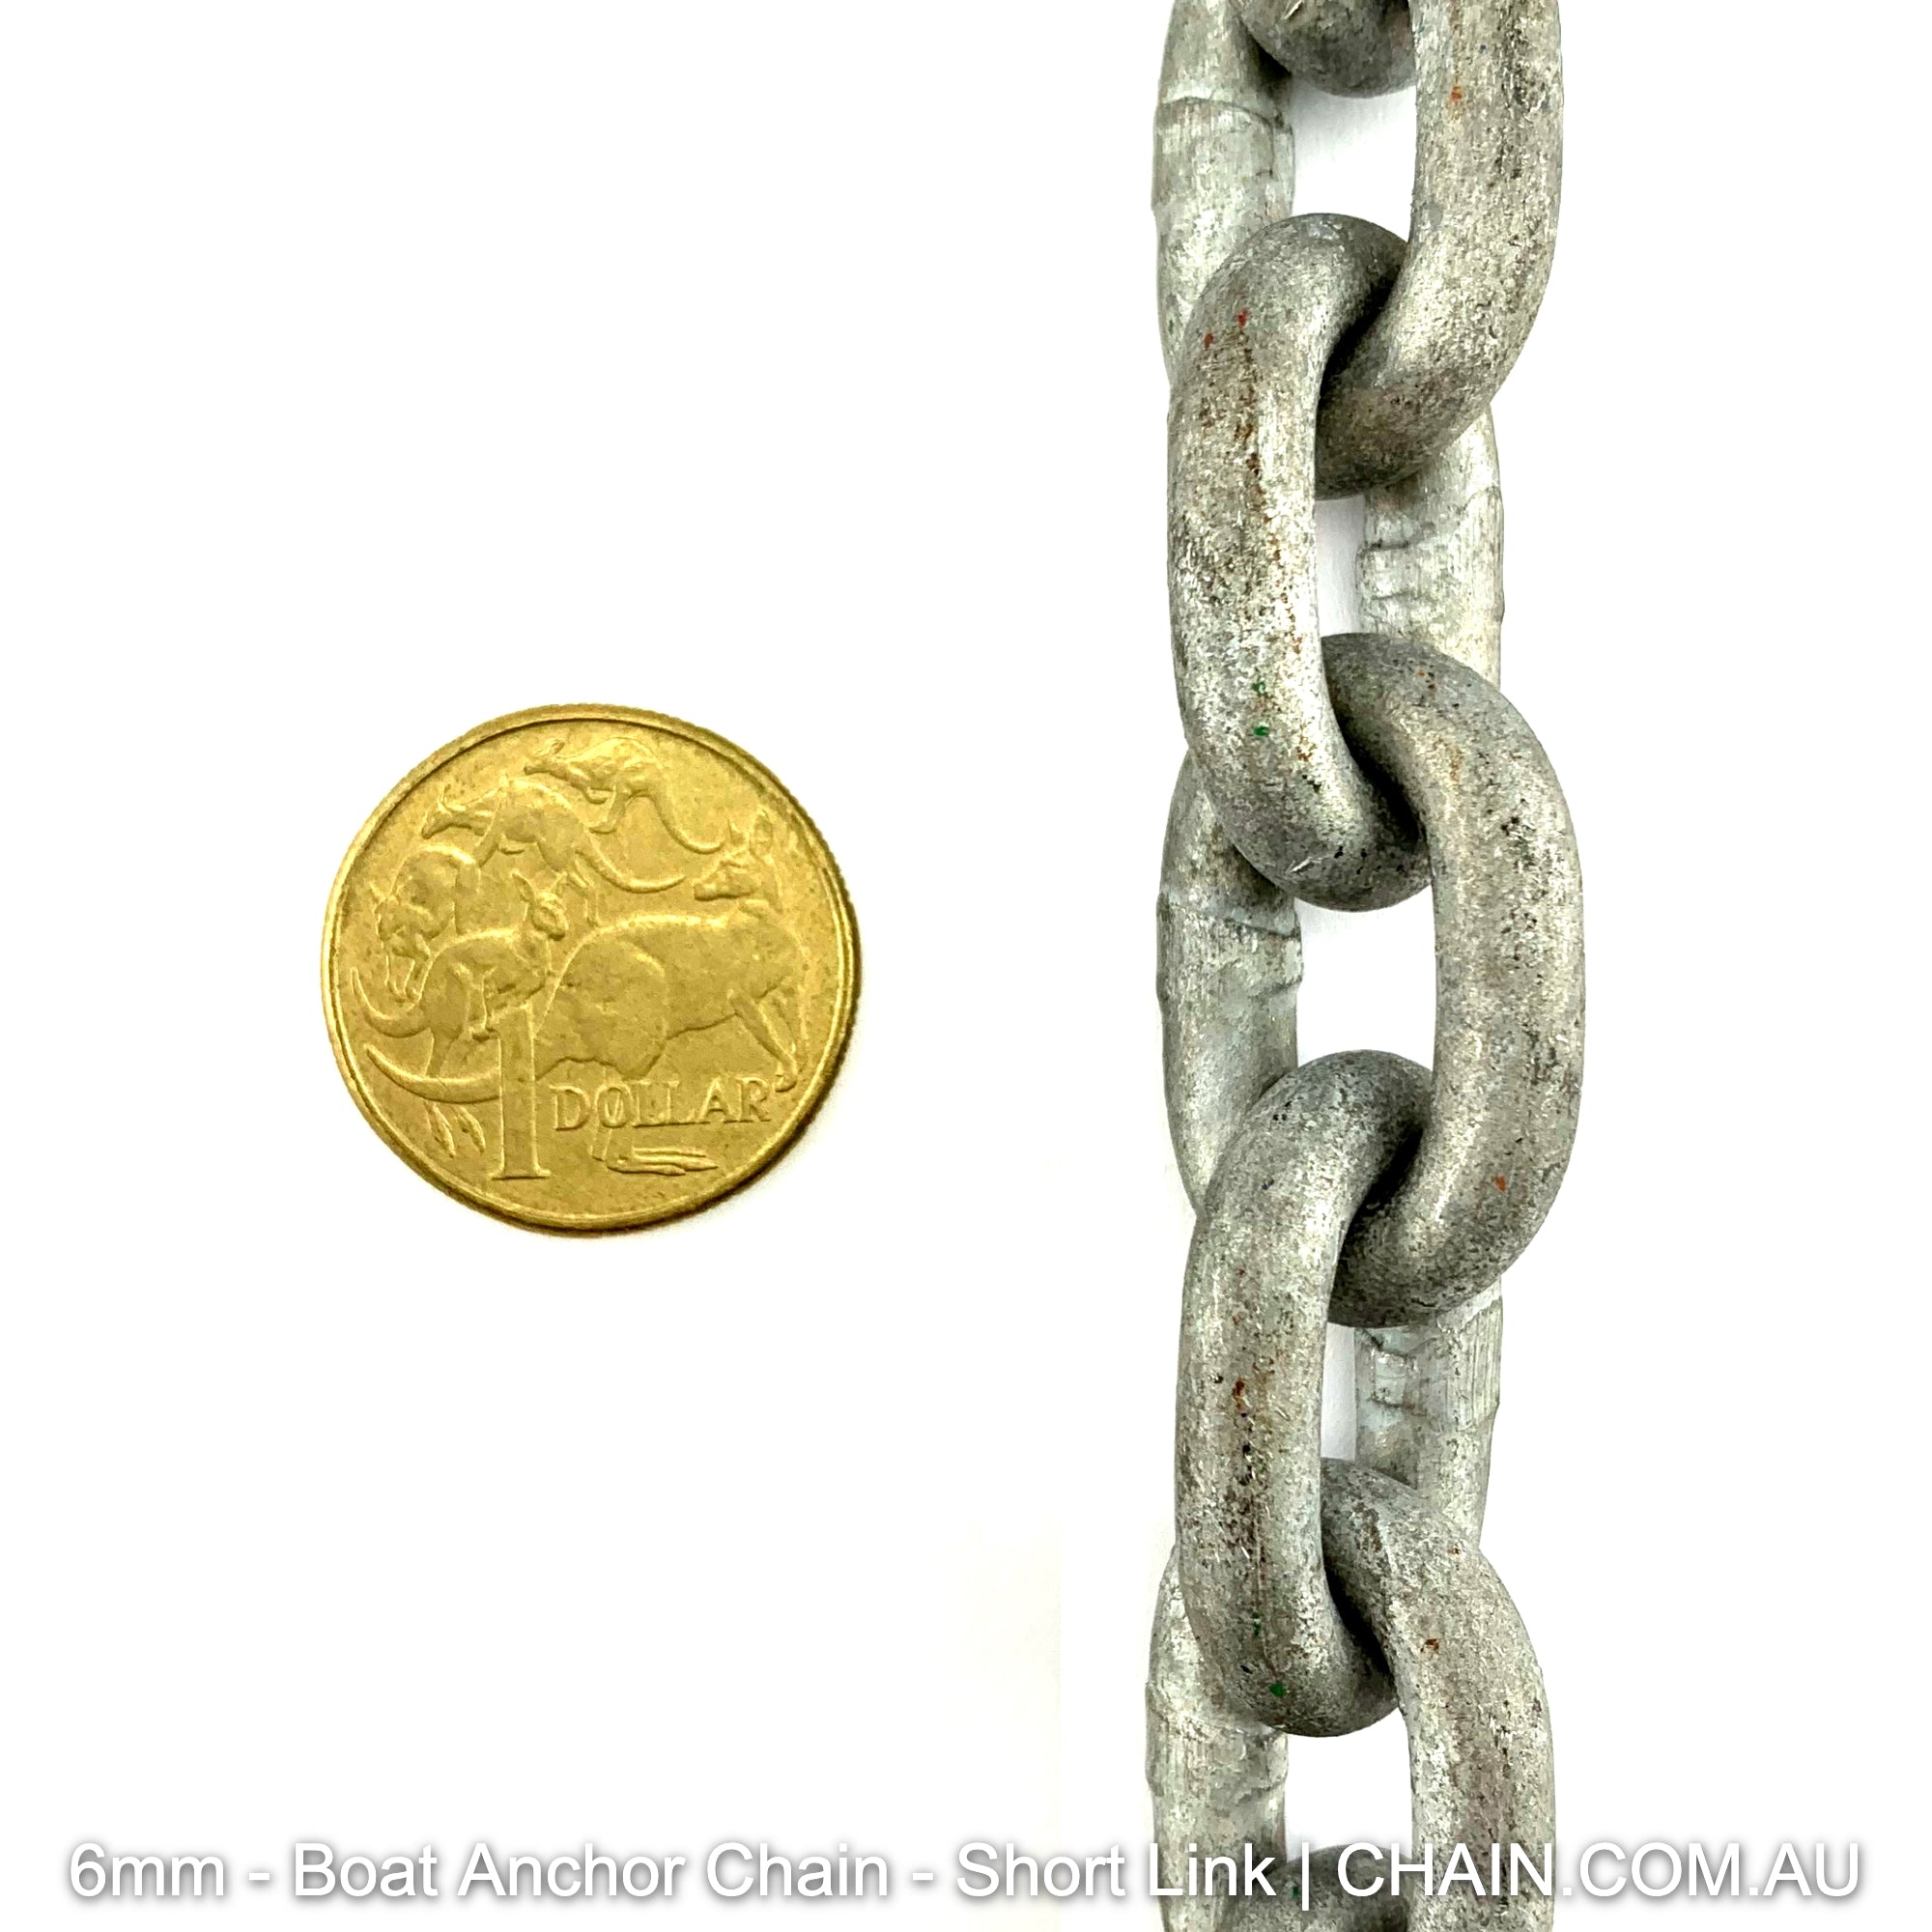 Boat anchor chain, size 6mm short link, galvanised. By the metre or bulk buy 25kg buckets. Shipping Australia wide. Shop online chain.com.au